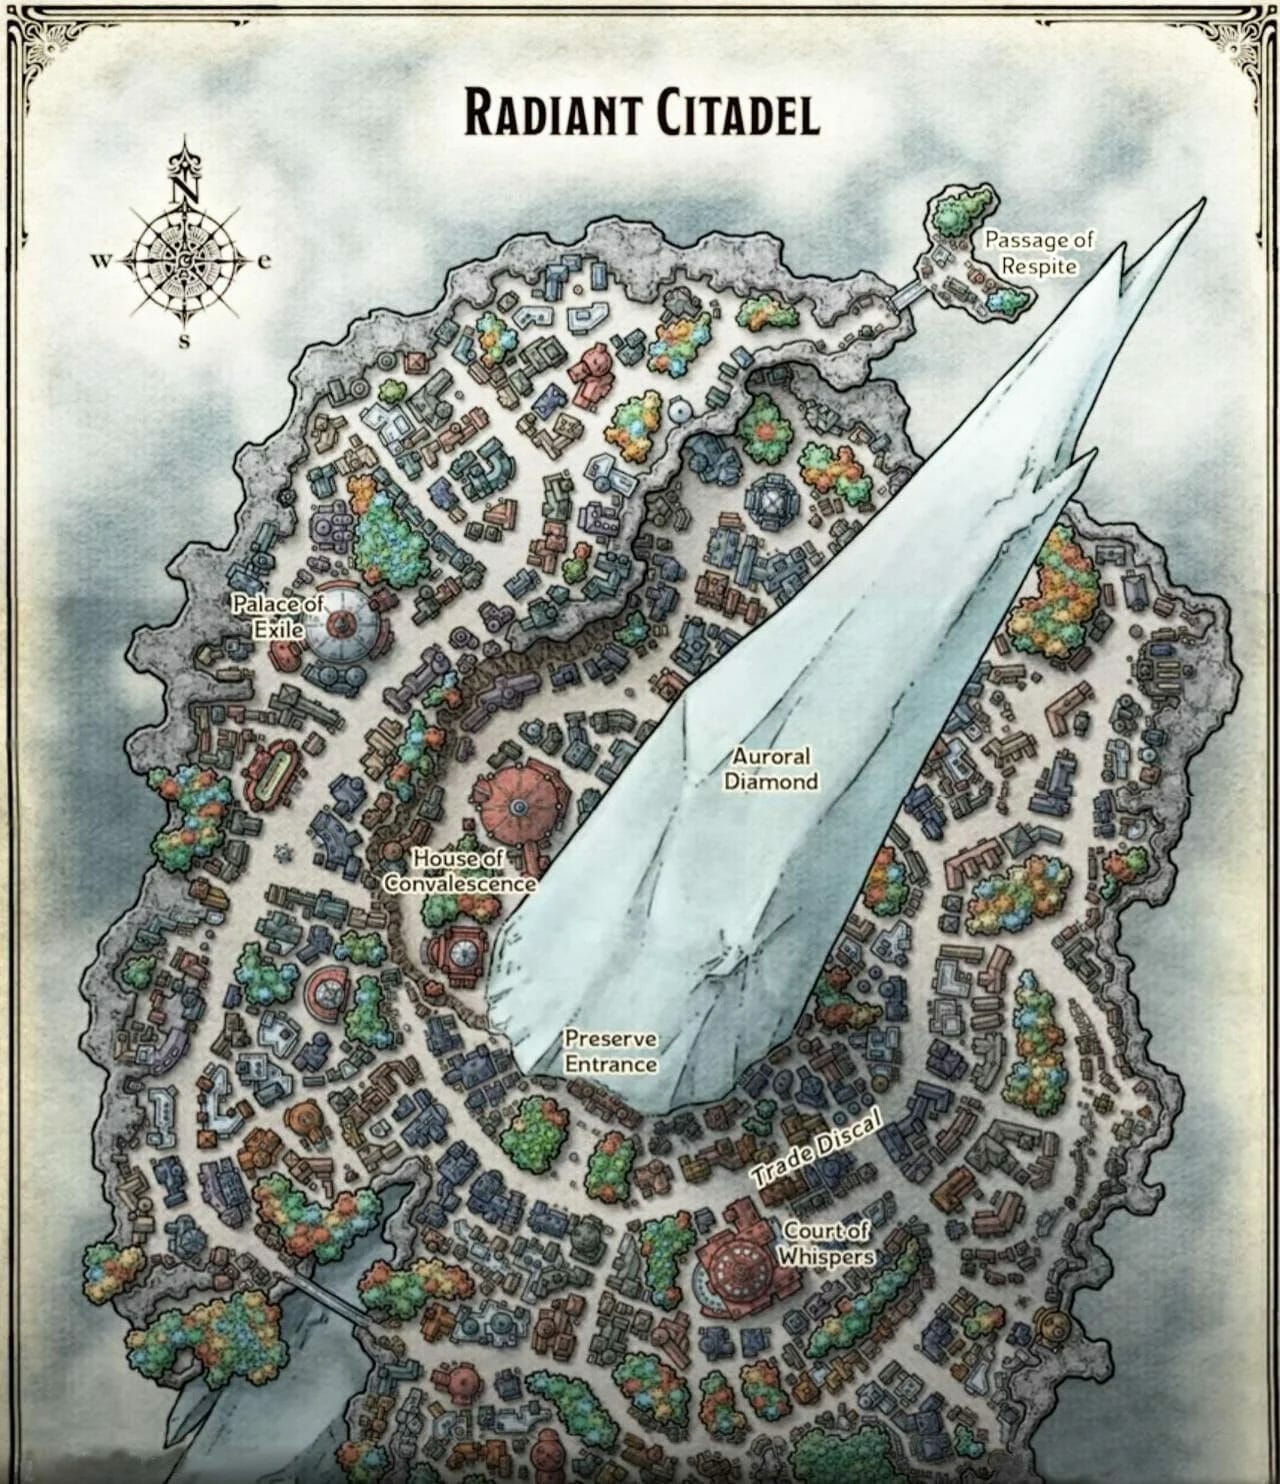 Radiant Citadel map and the Auroral Diamond, in the D&D multiverse